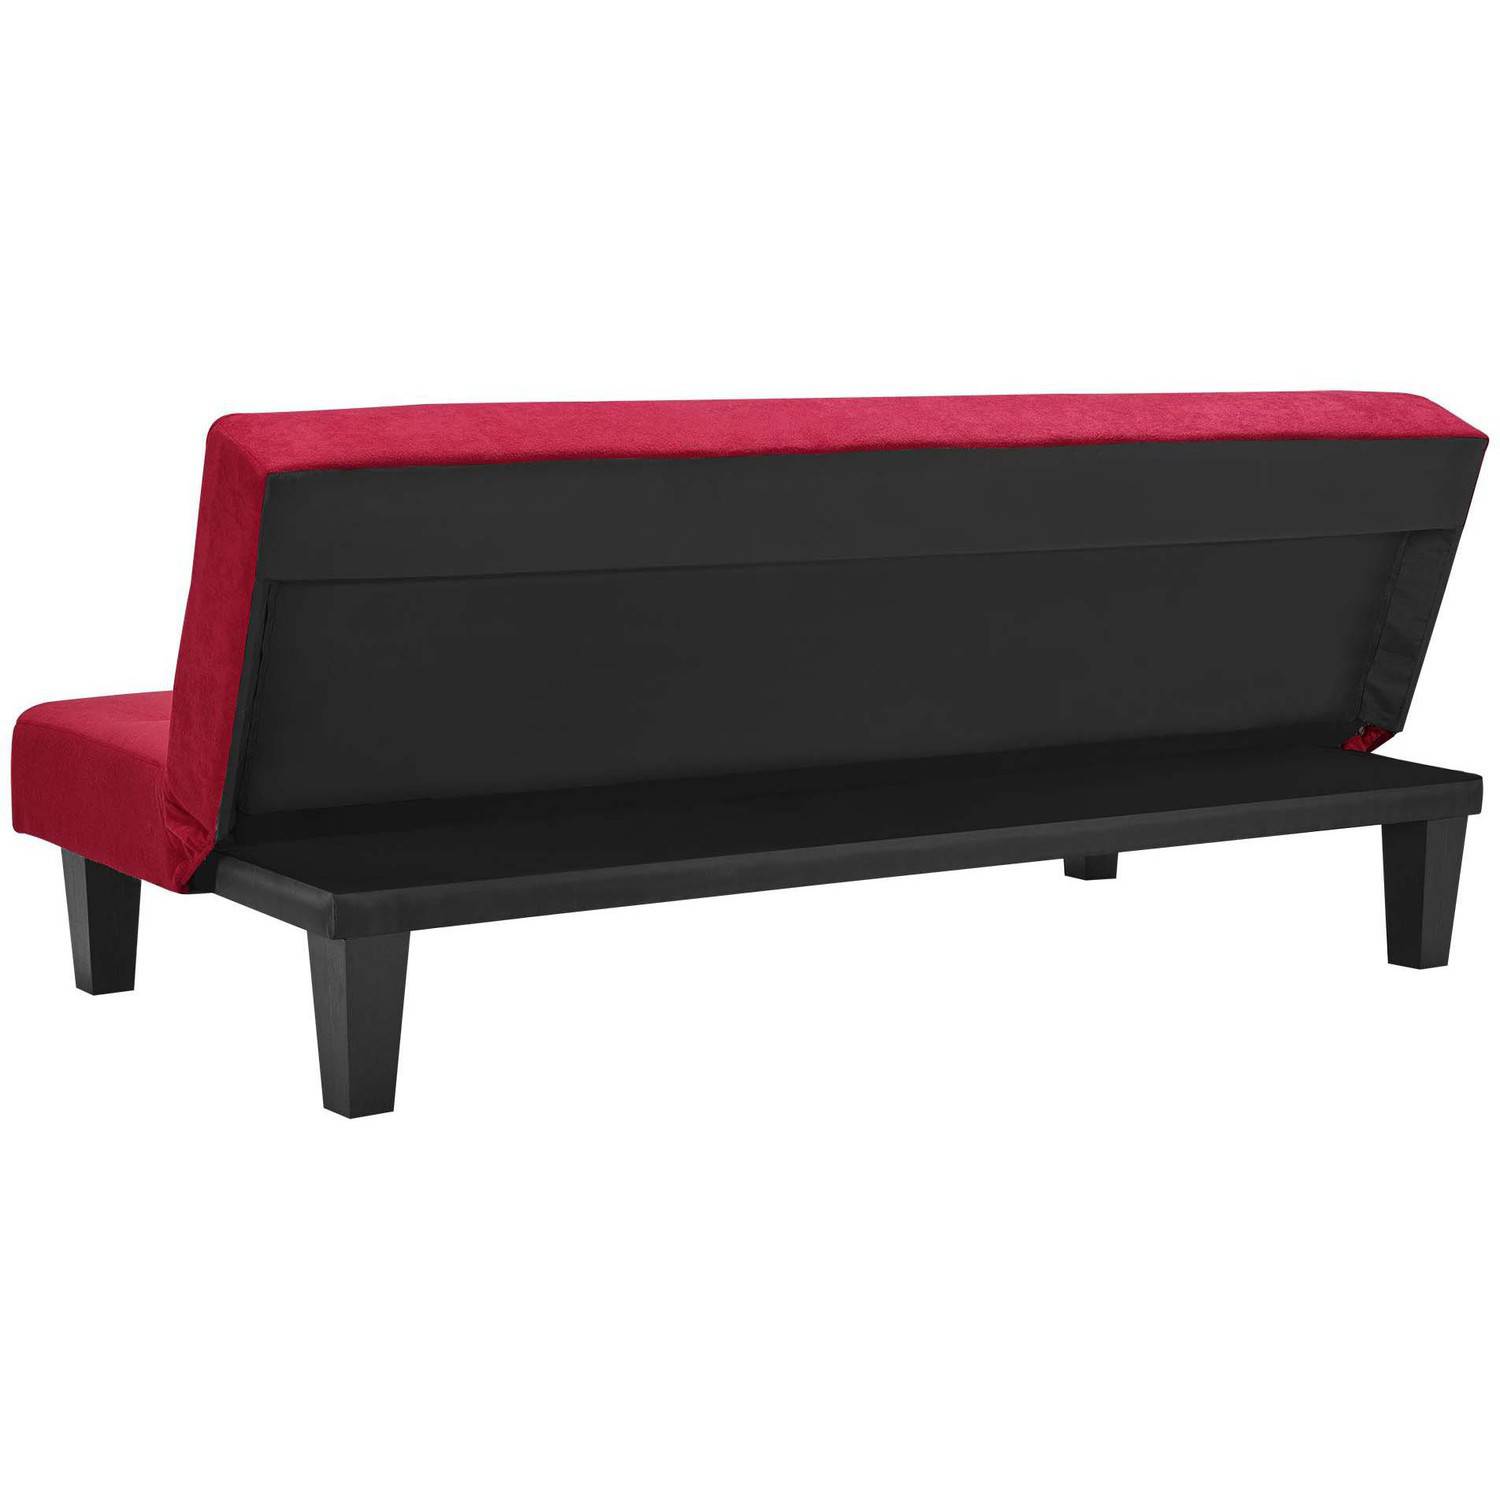 DHP Kebo Futon with Microfiber Cover, Red - image 11 of 13